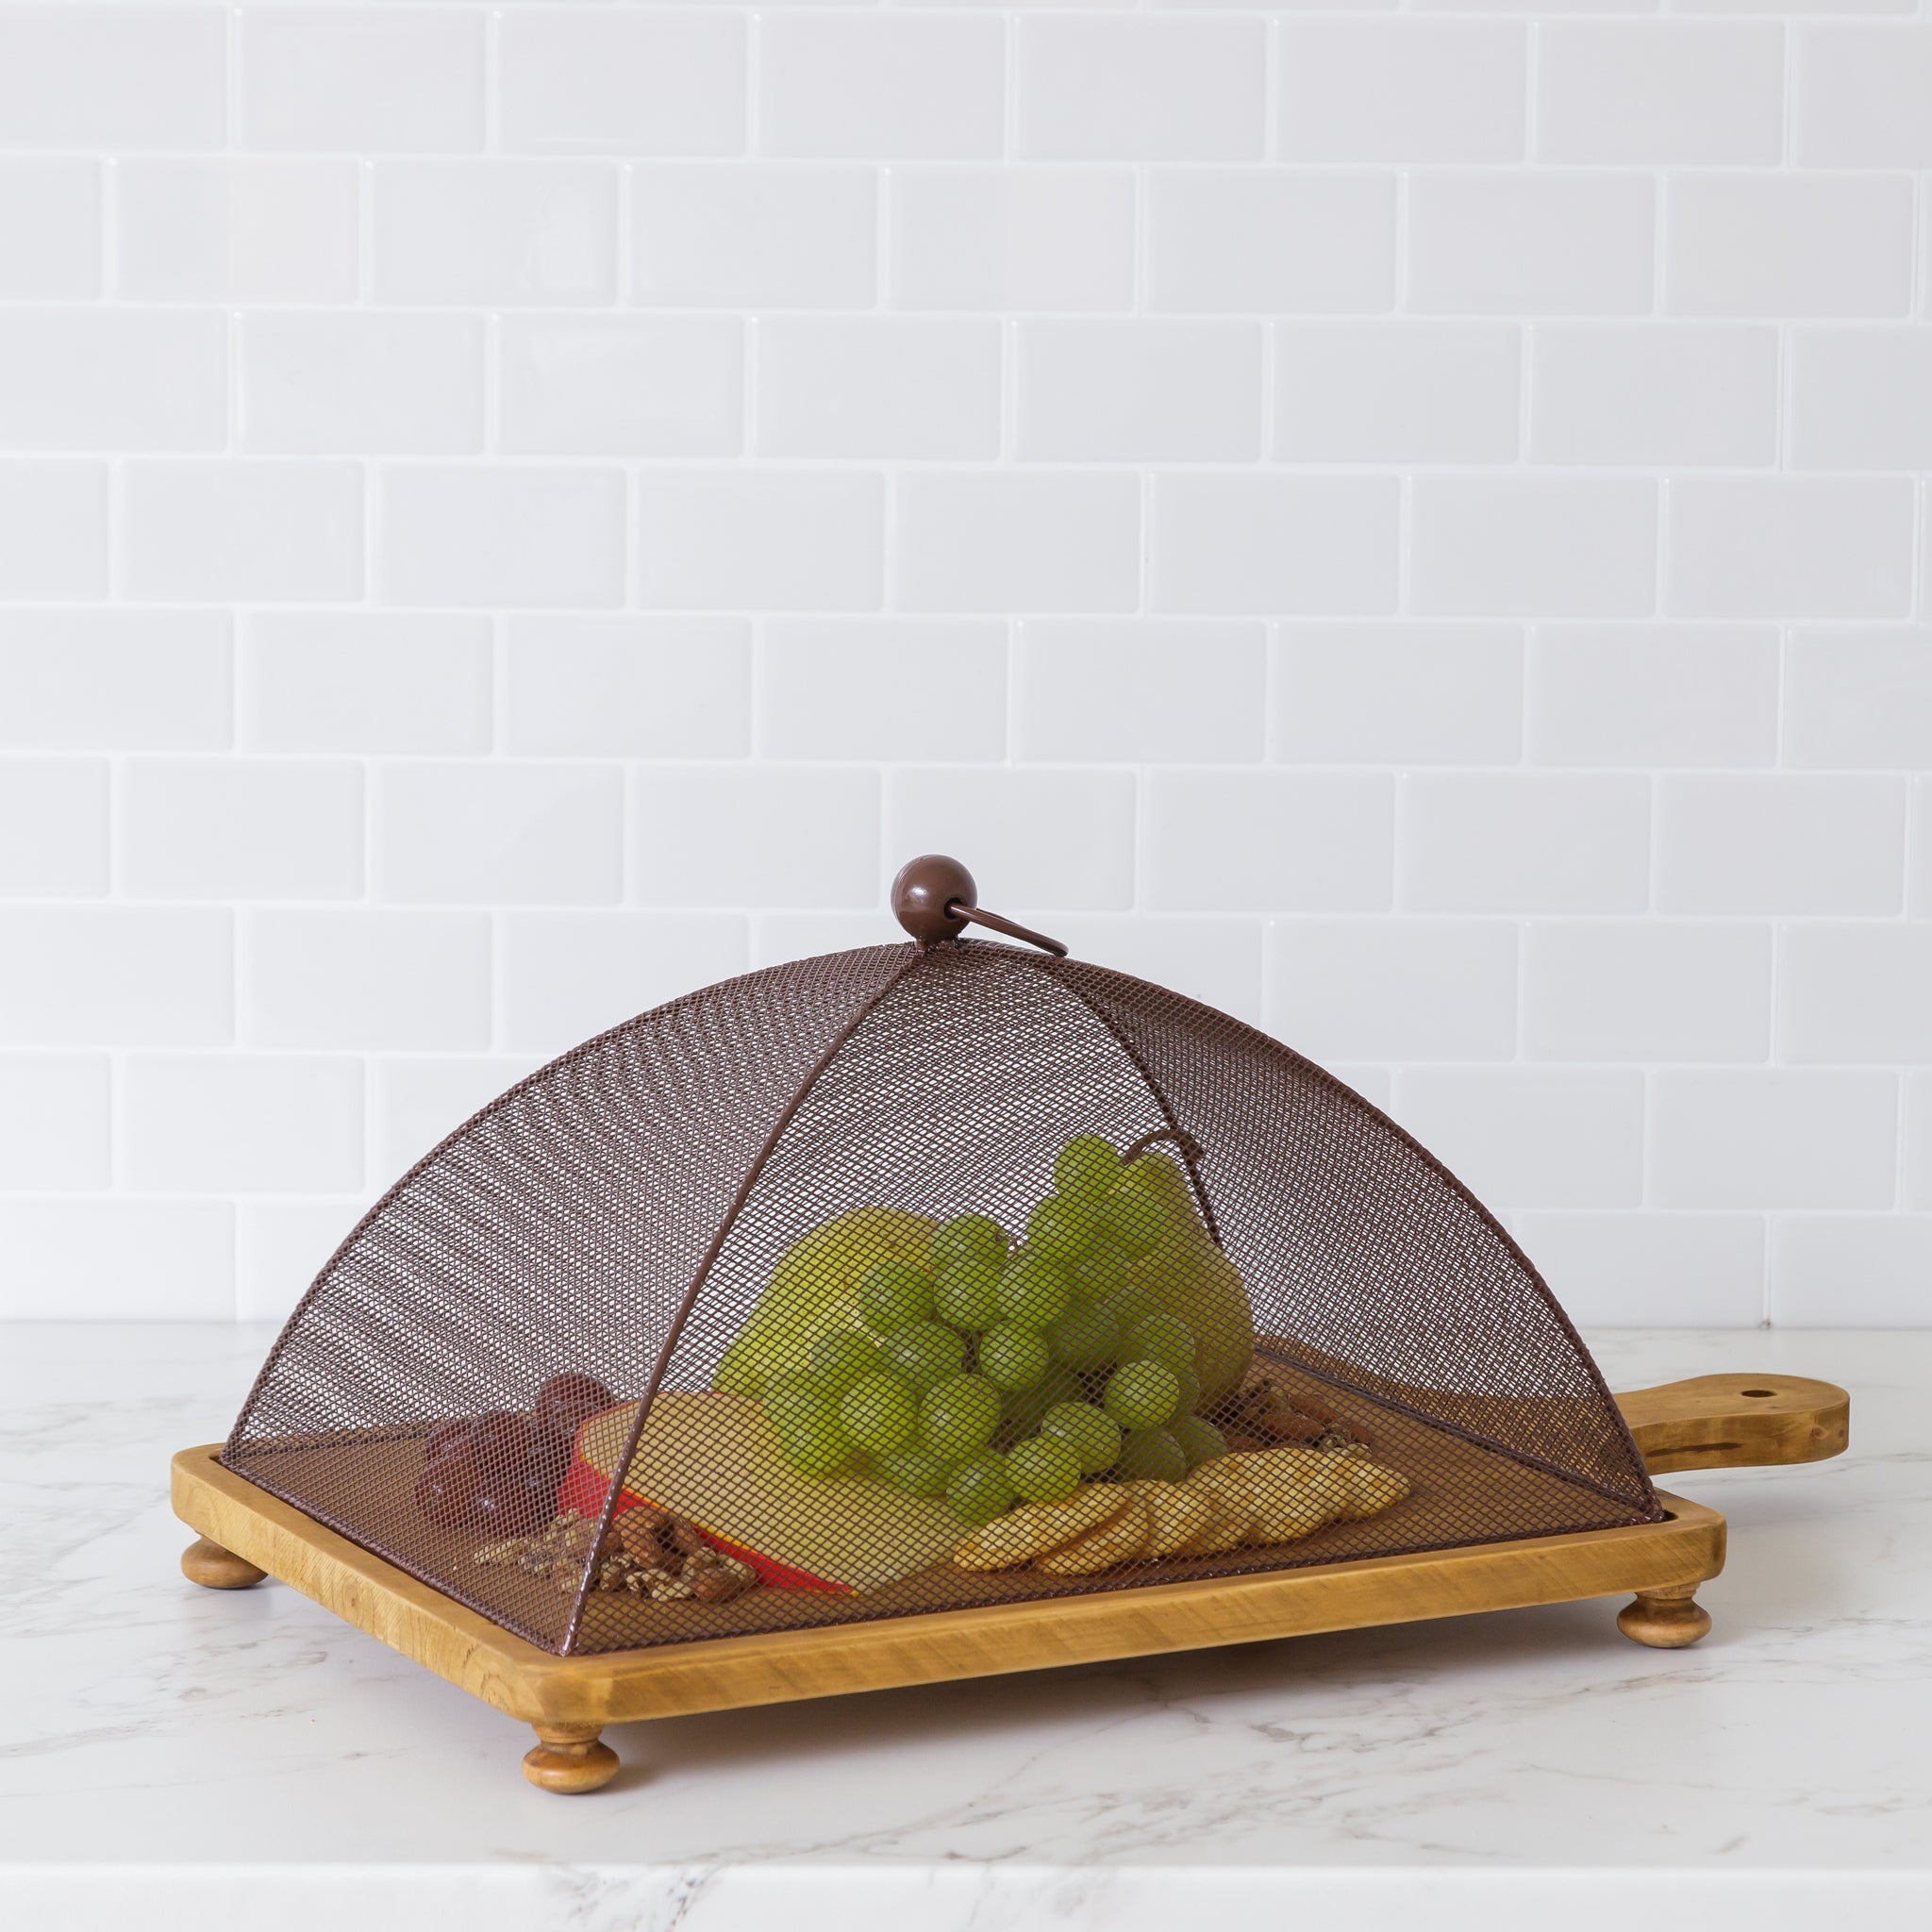 Wooden Serving Tray With Mesh Dome